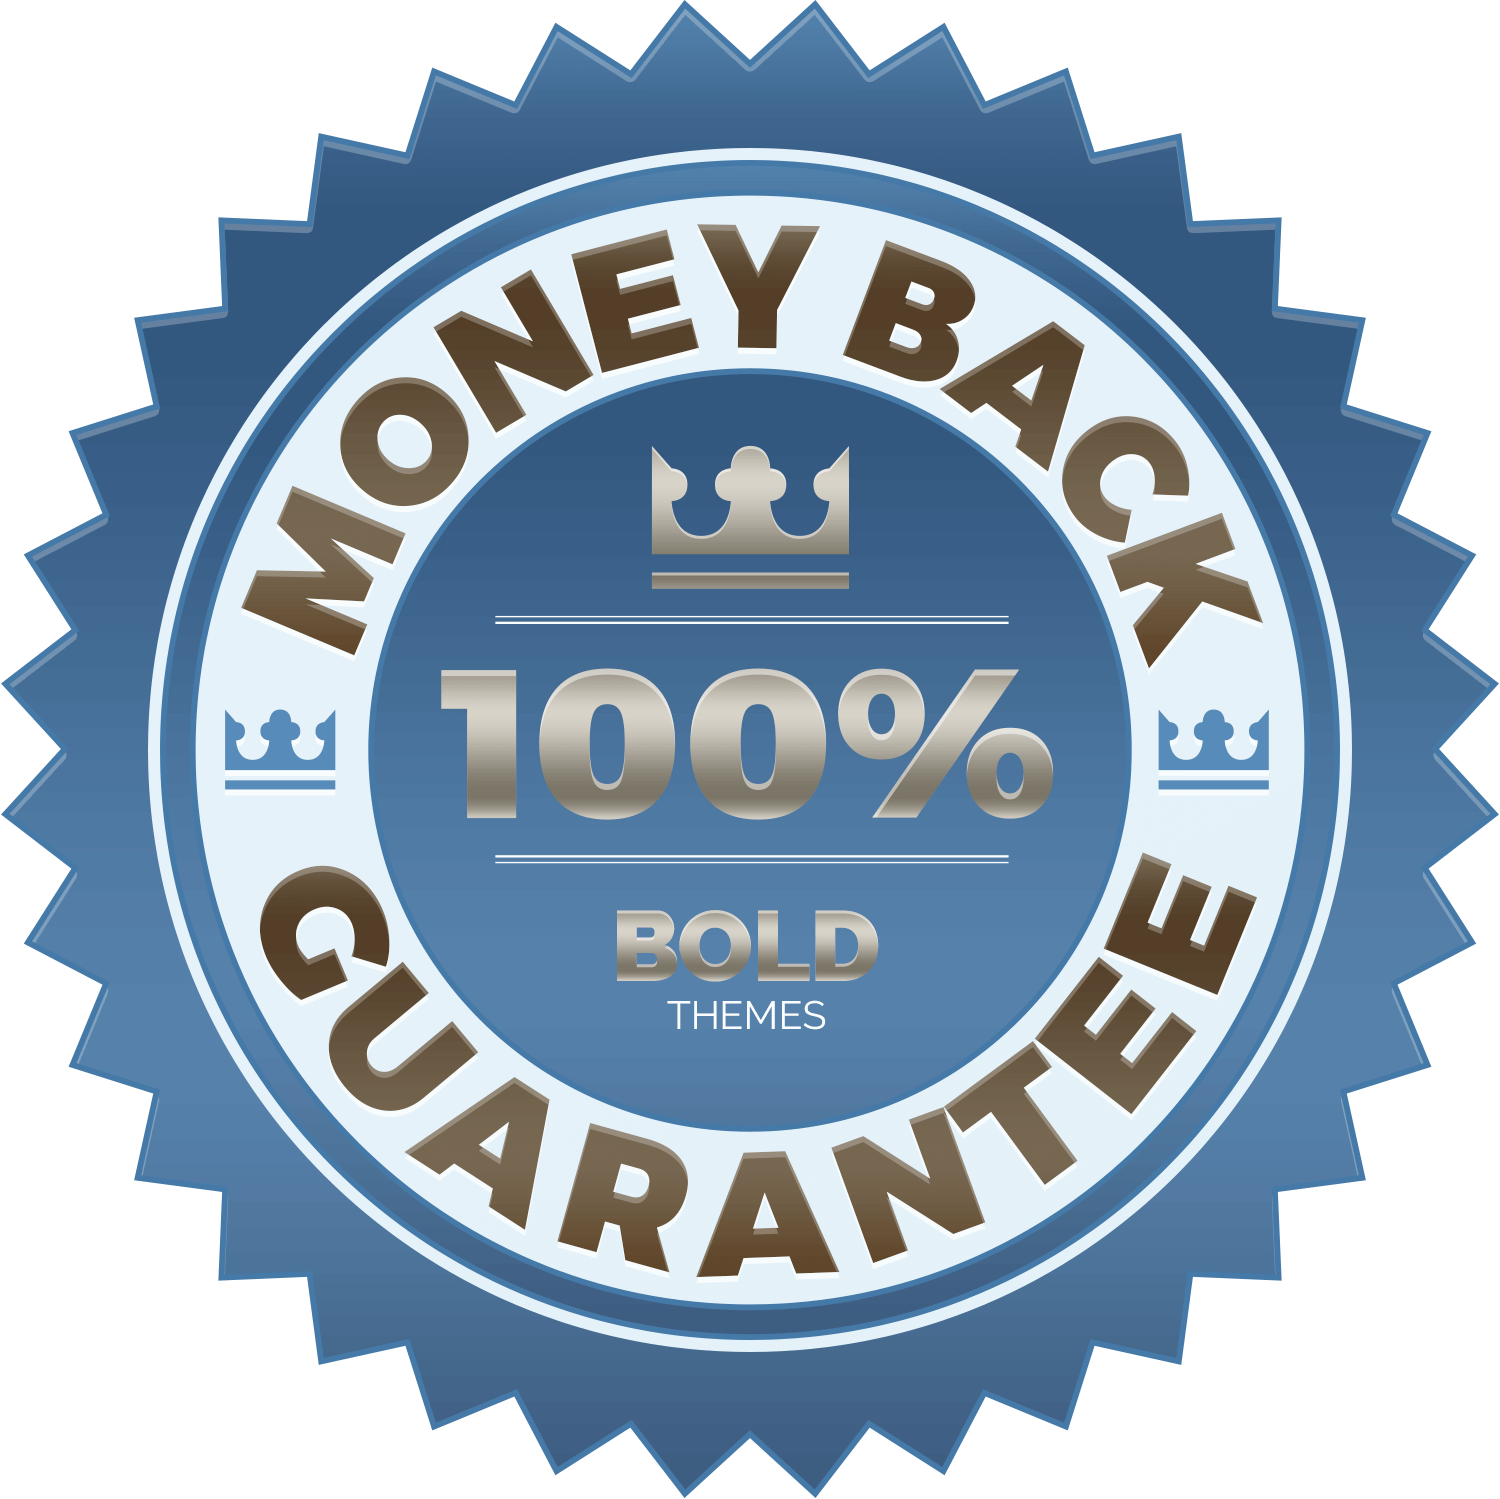 https://brbhomes.ie/wp-content/uploads/2017/05/Money-back-guarantee.png